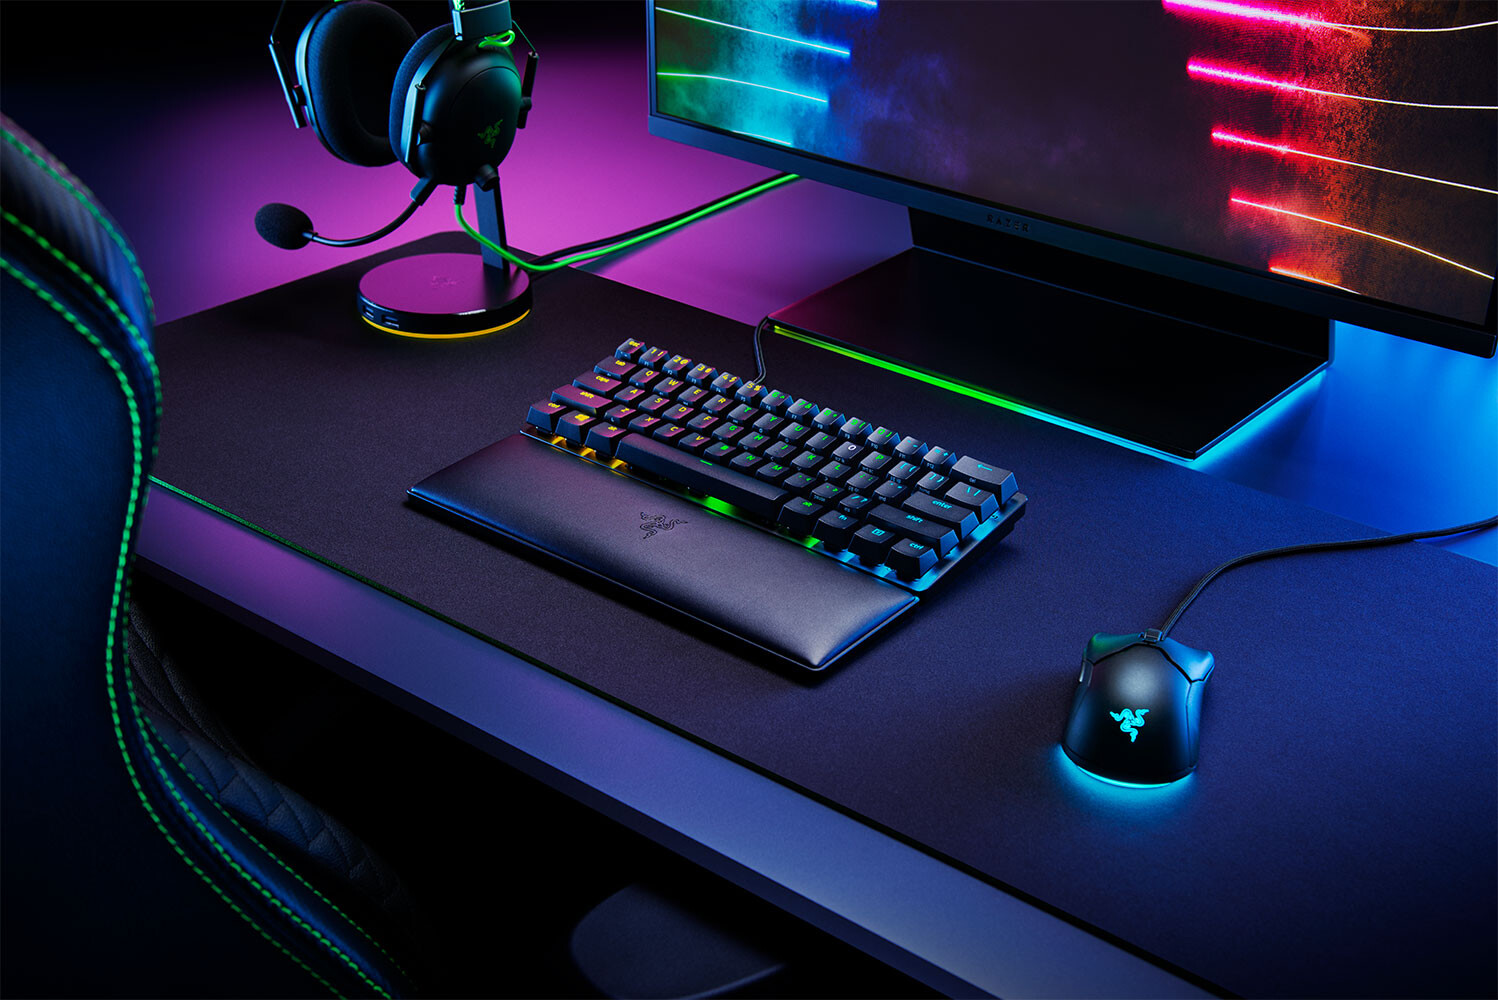 Razer Announces Keycaps, Coiled Cables And Wrist Rests To Level Up